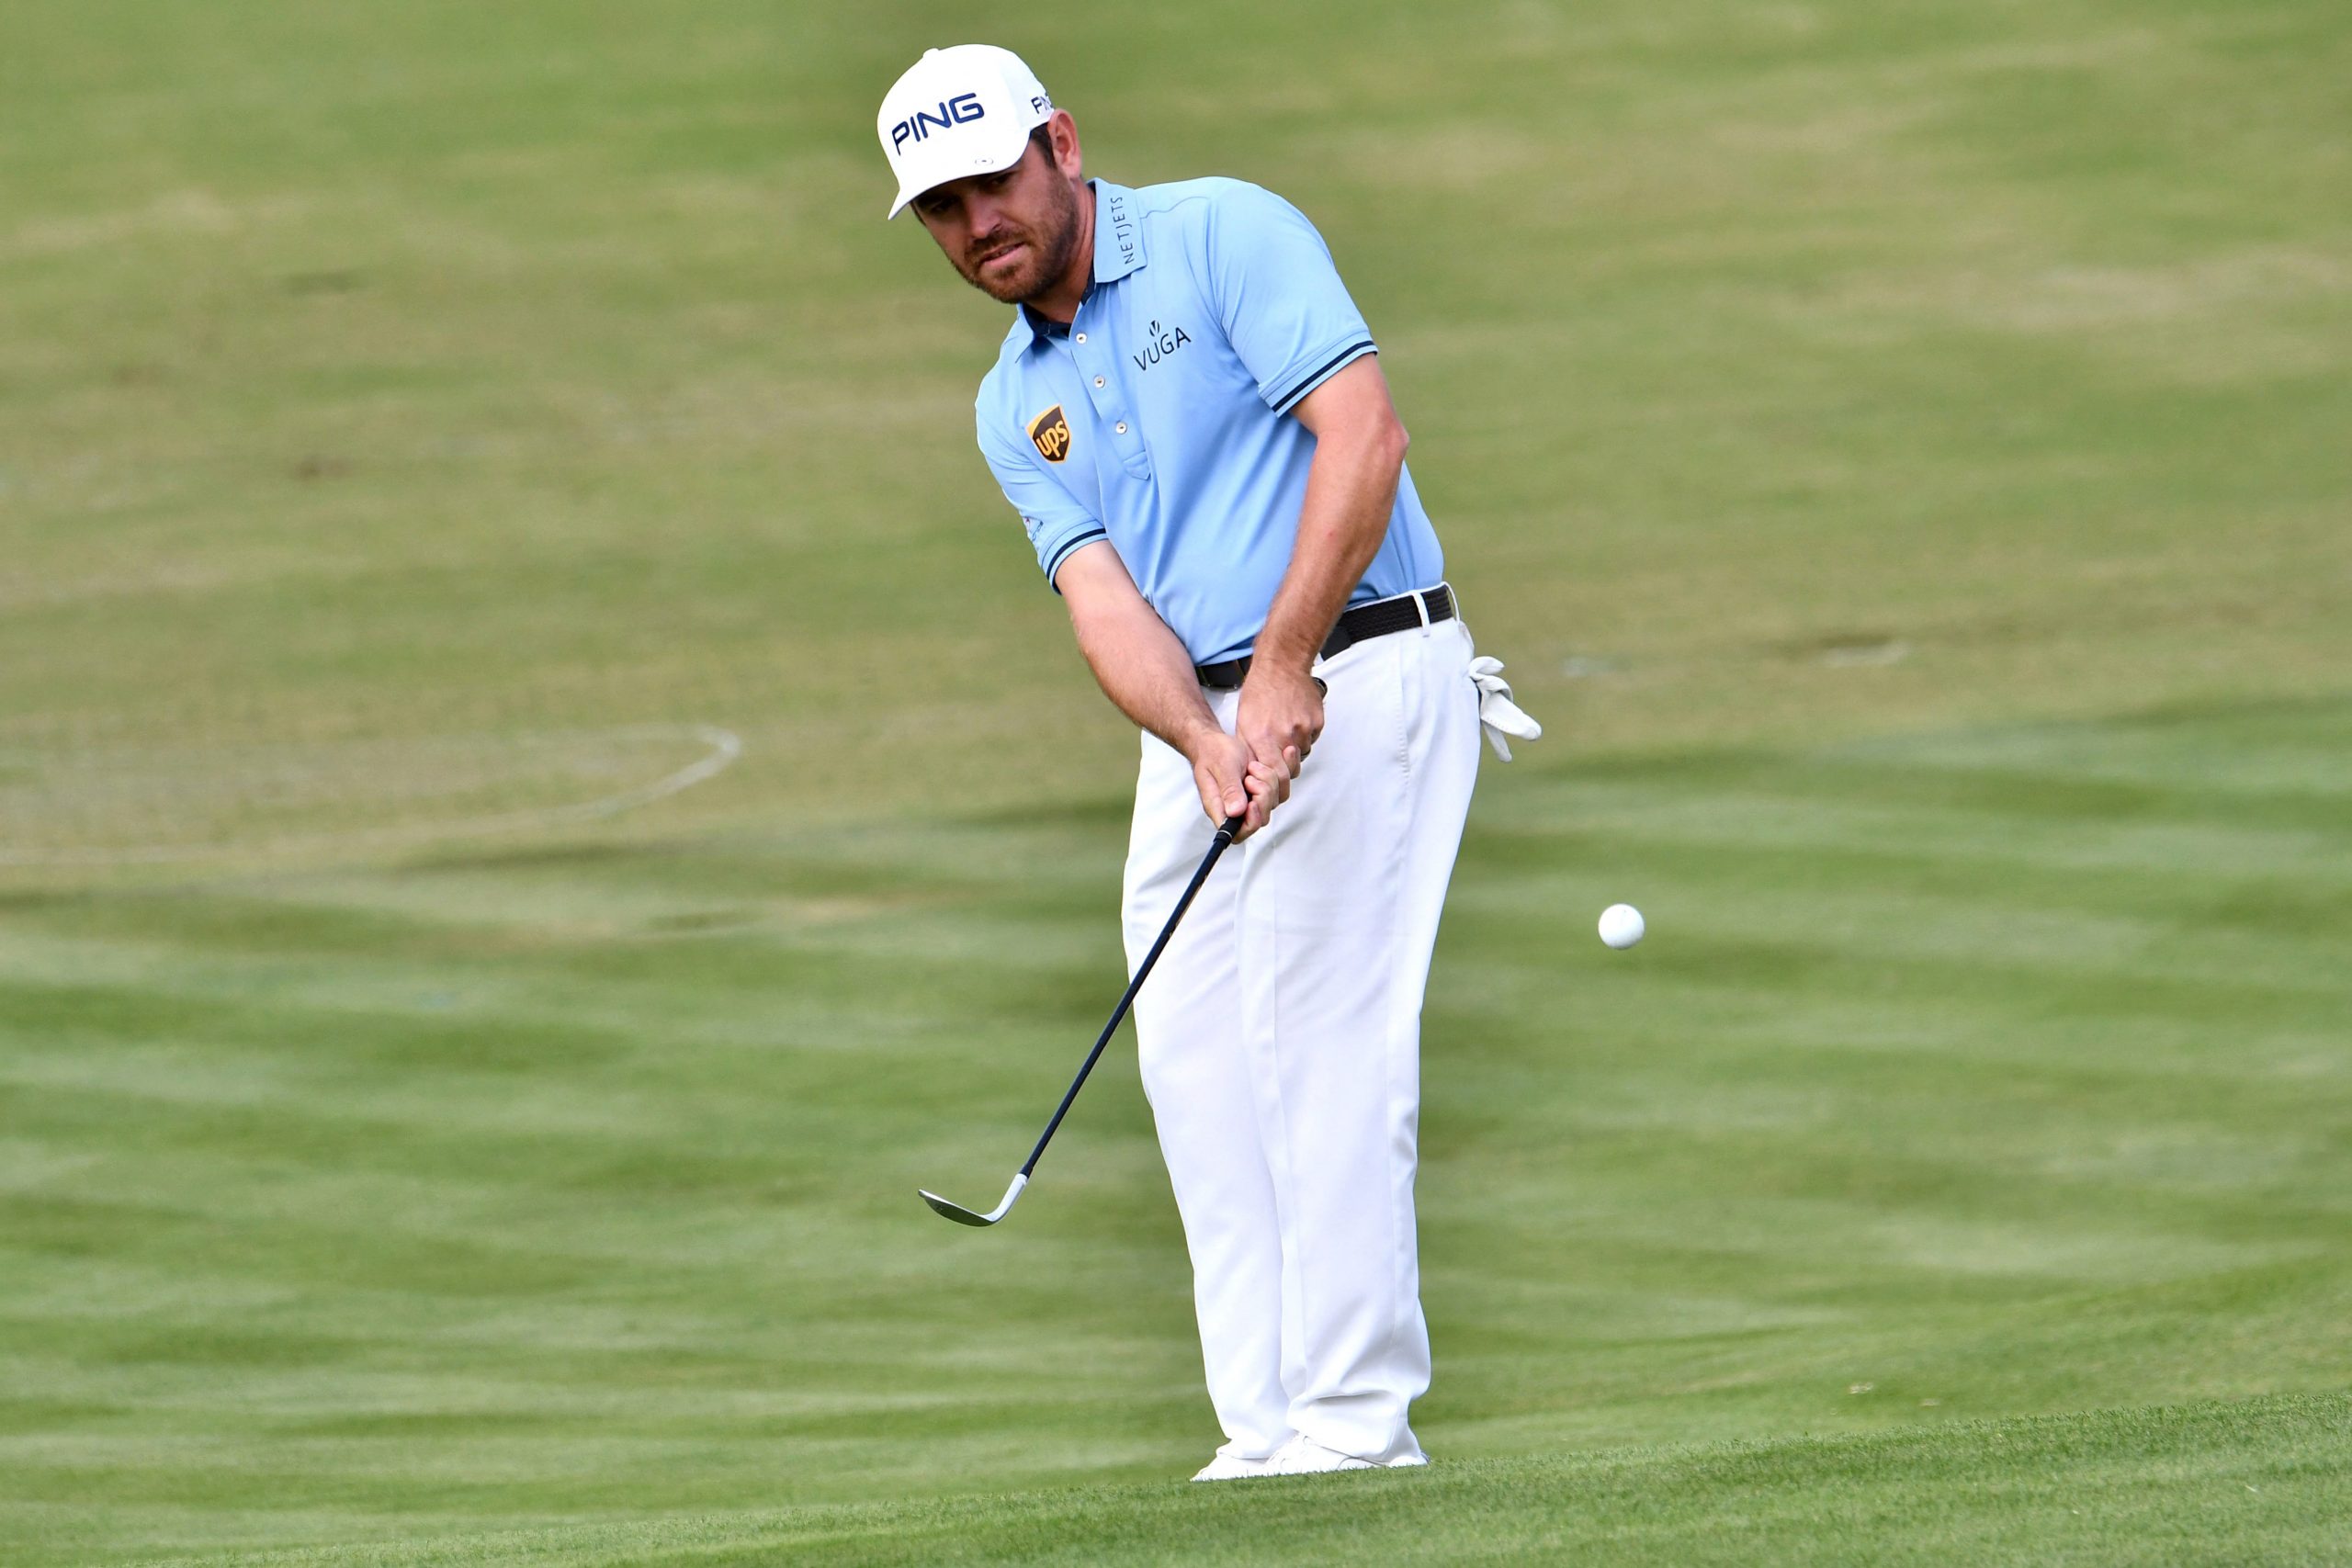 Louis Oosthuizen leads the way in The Open Championship golf tournament